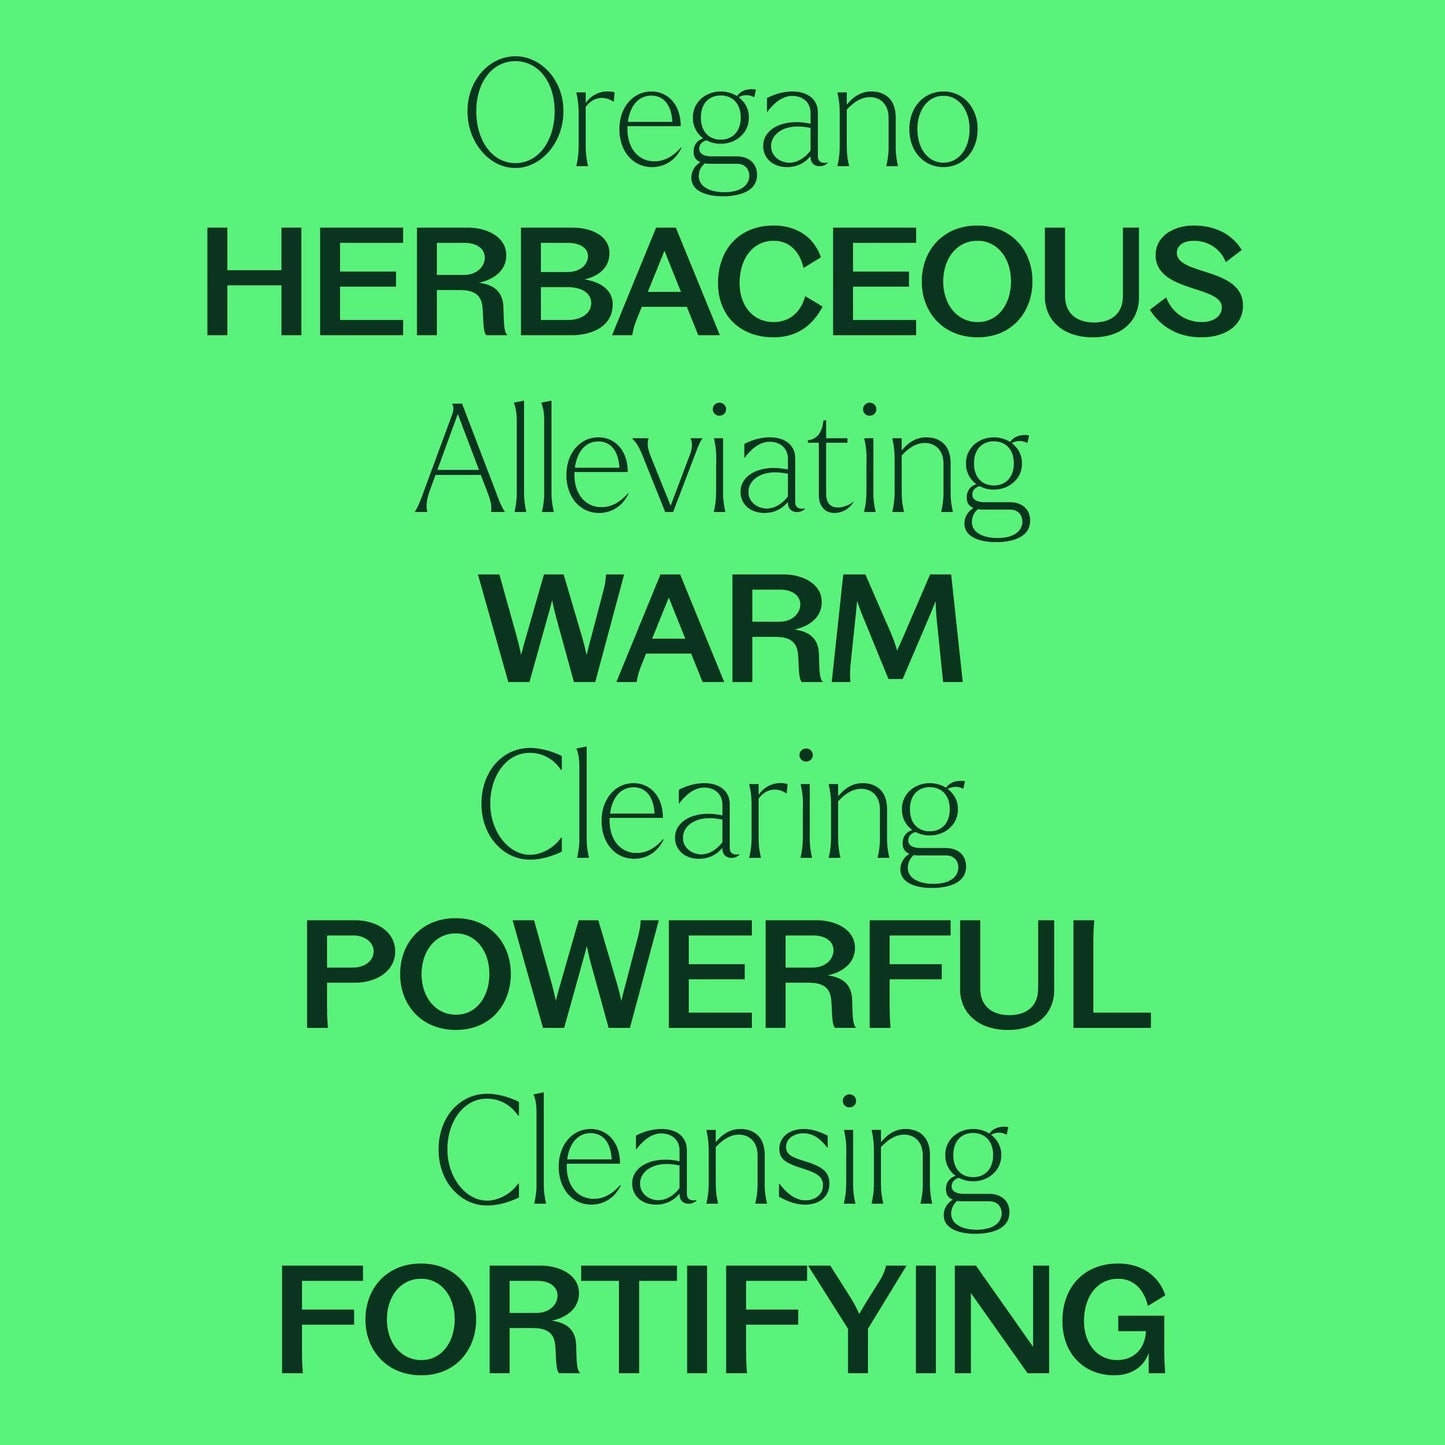 Organic Oregano Essential Oil is herbaceous, alleviating, warm, clearing, powerful, cleansing, fortifying